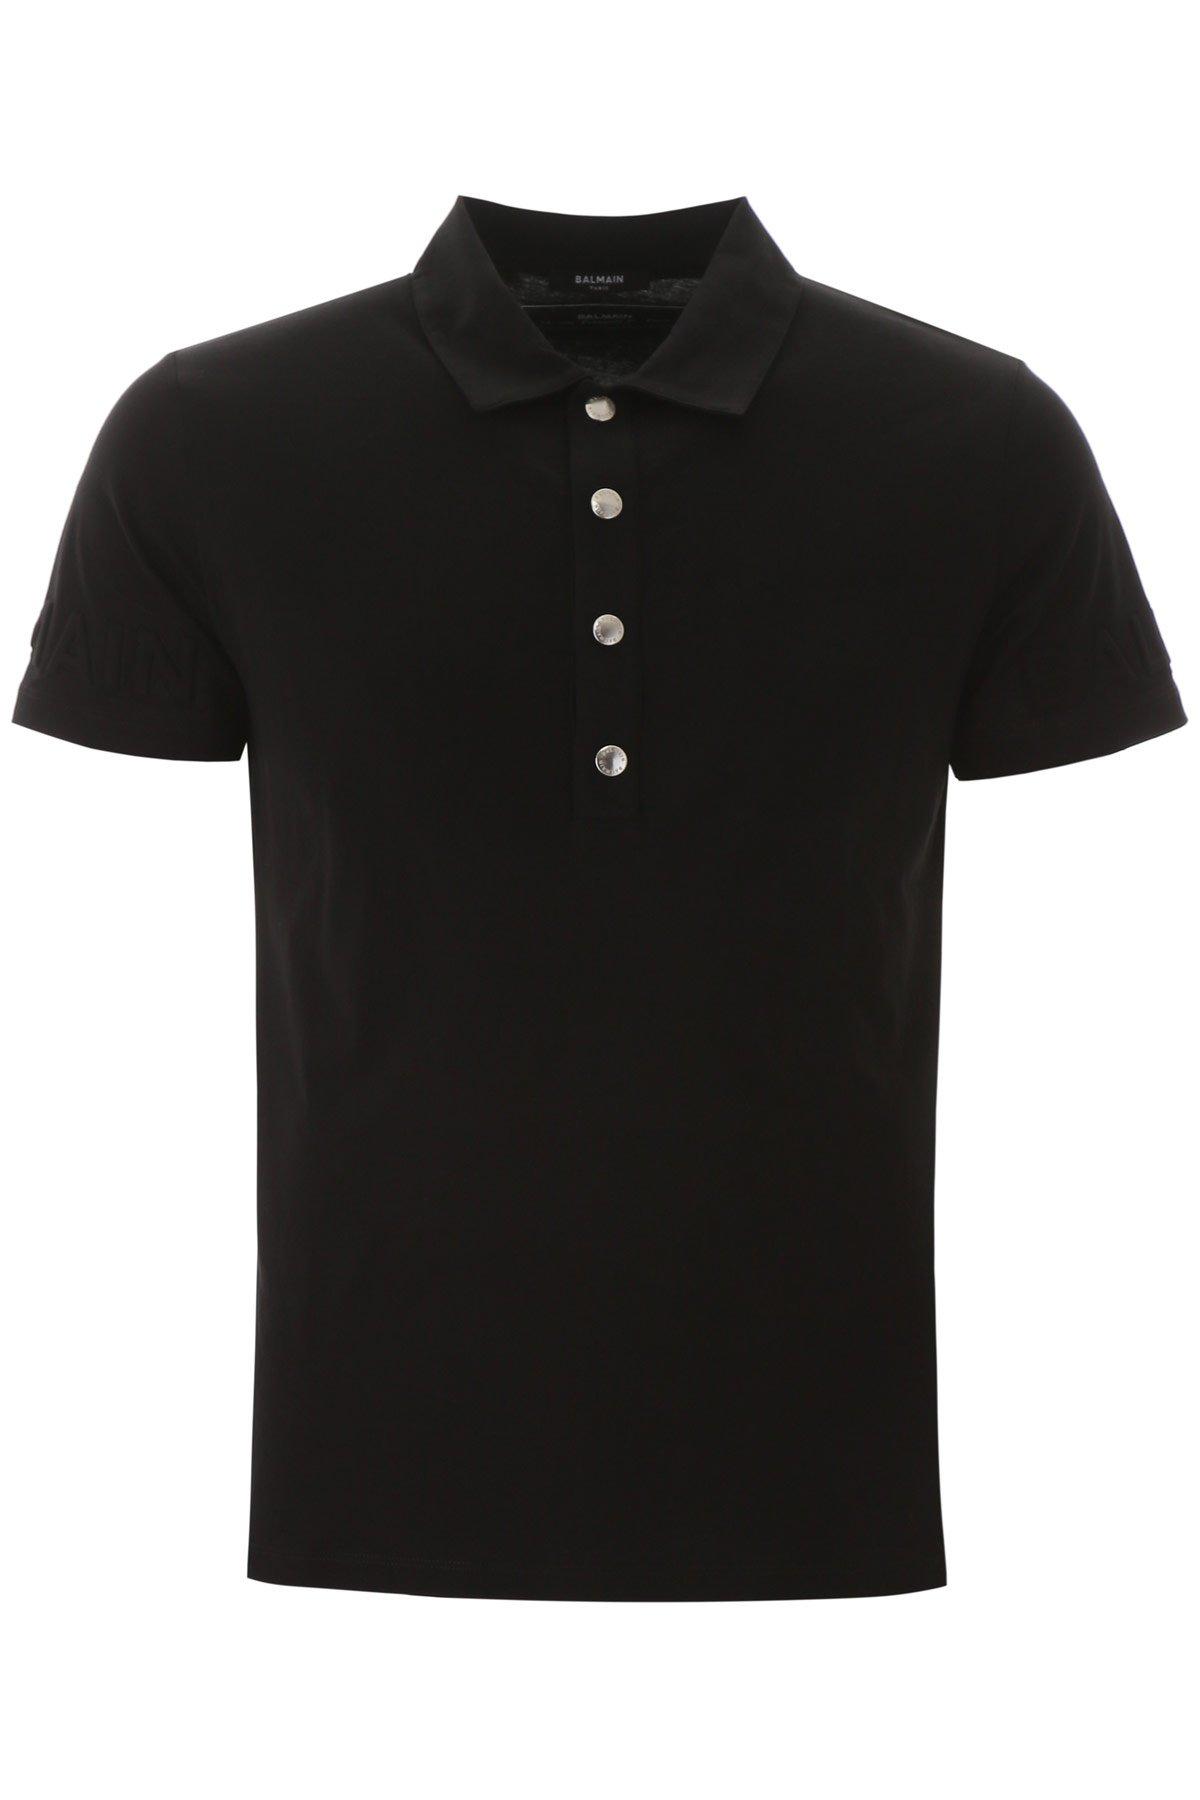 Balmain Cotton Polo Shirt With Embossed Logo in Black for Men - Lyst